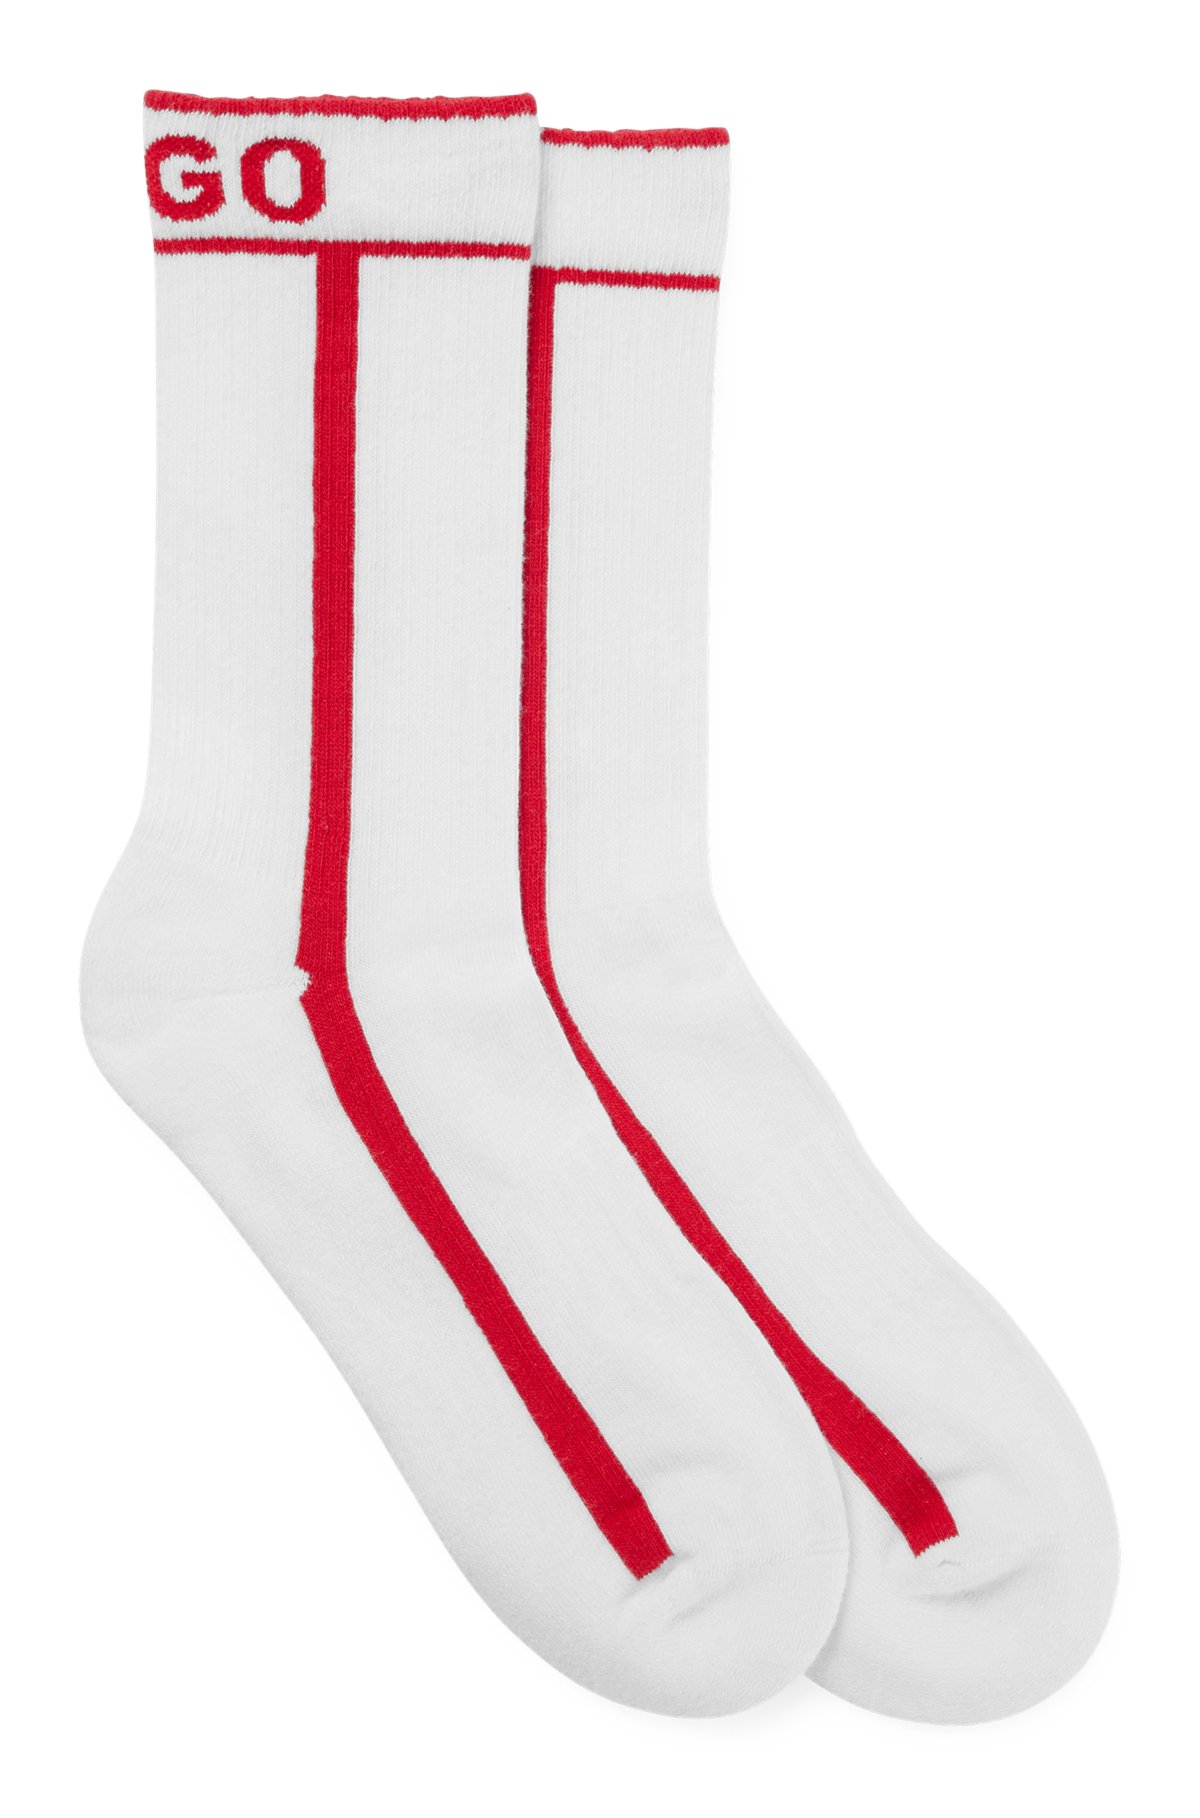 HUGO - Two-pack of ribbed socks with stripes and logo